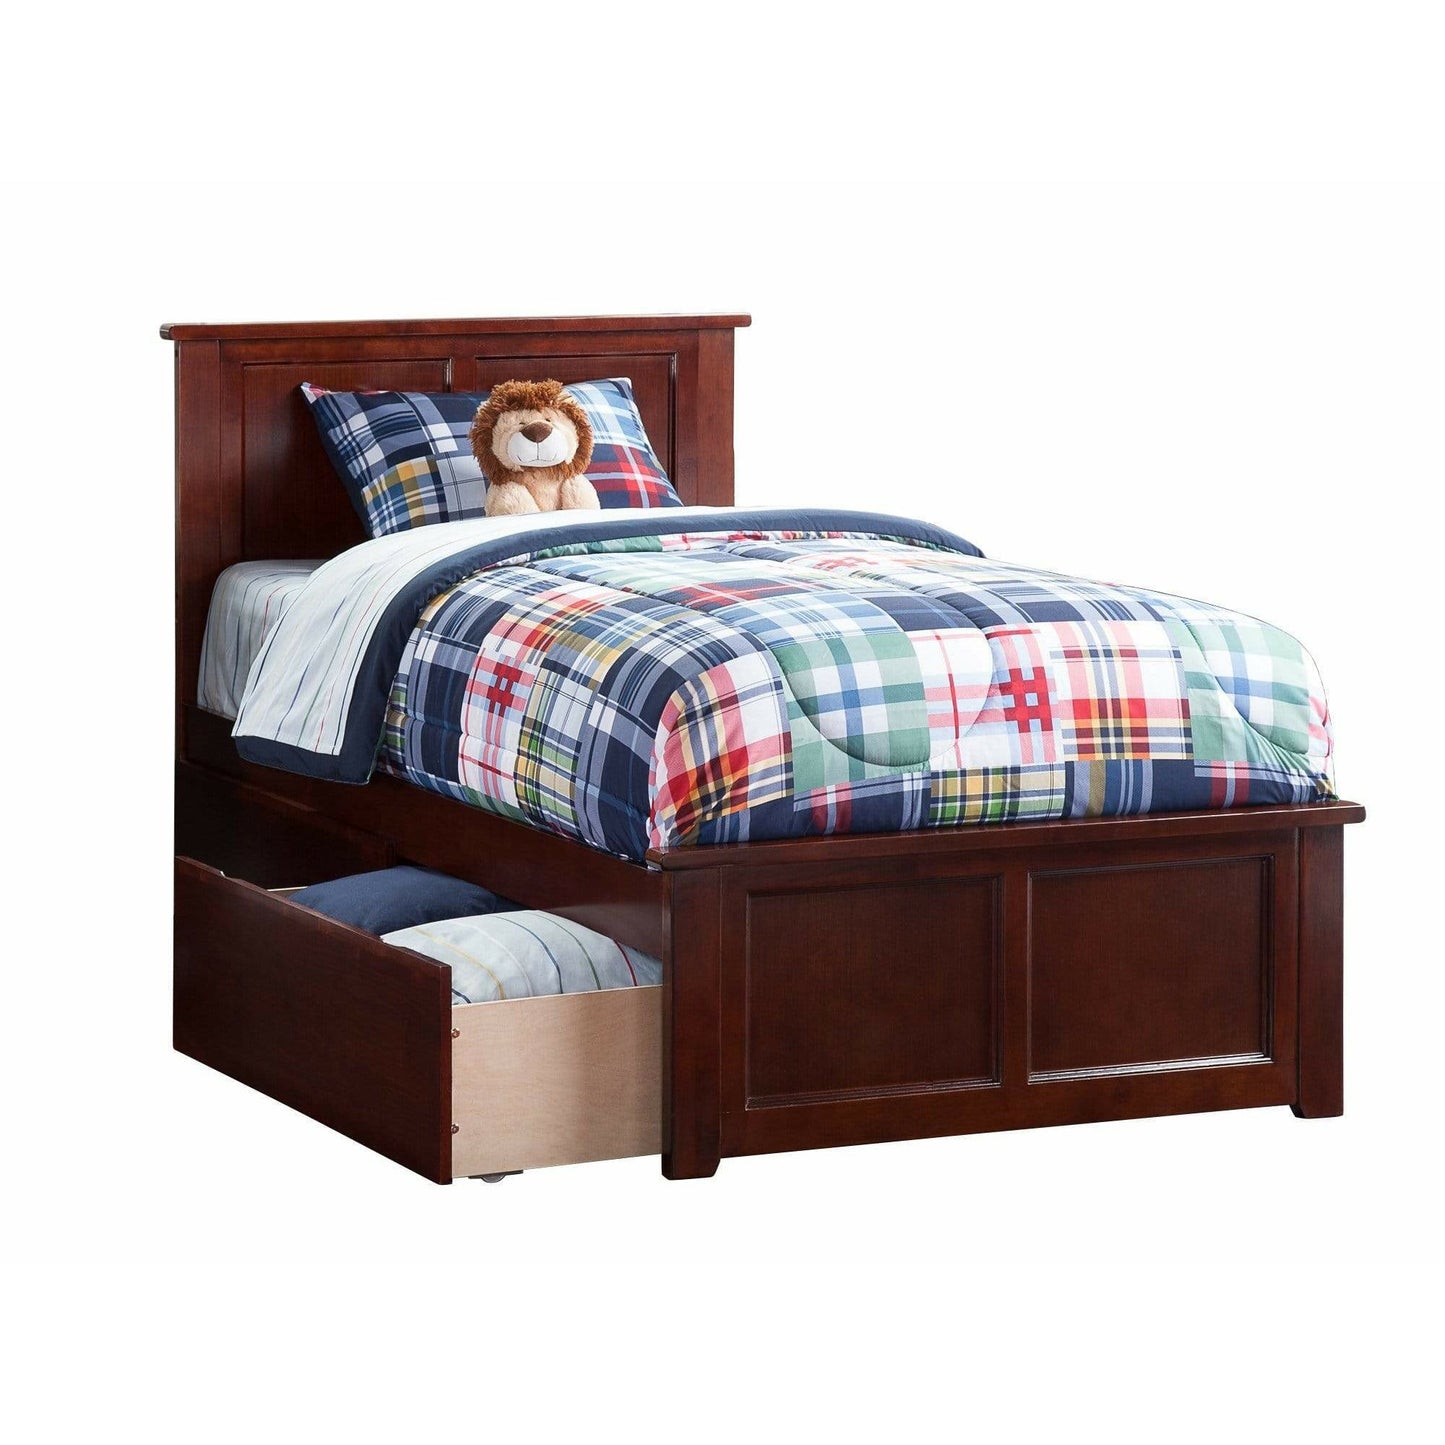 Atlantic Furniture Bed Walnut Madison Twin XL Platform Bed with Matching Foot Board with 2 Urban Bed Drawers in Espresso